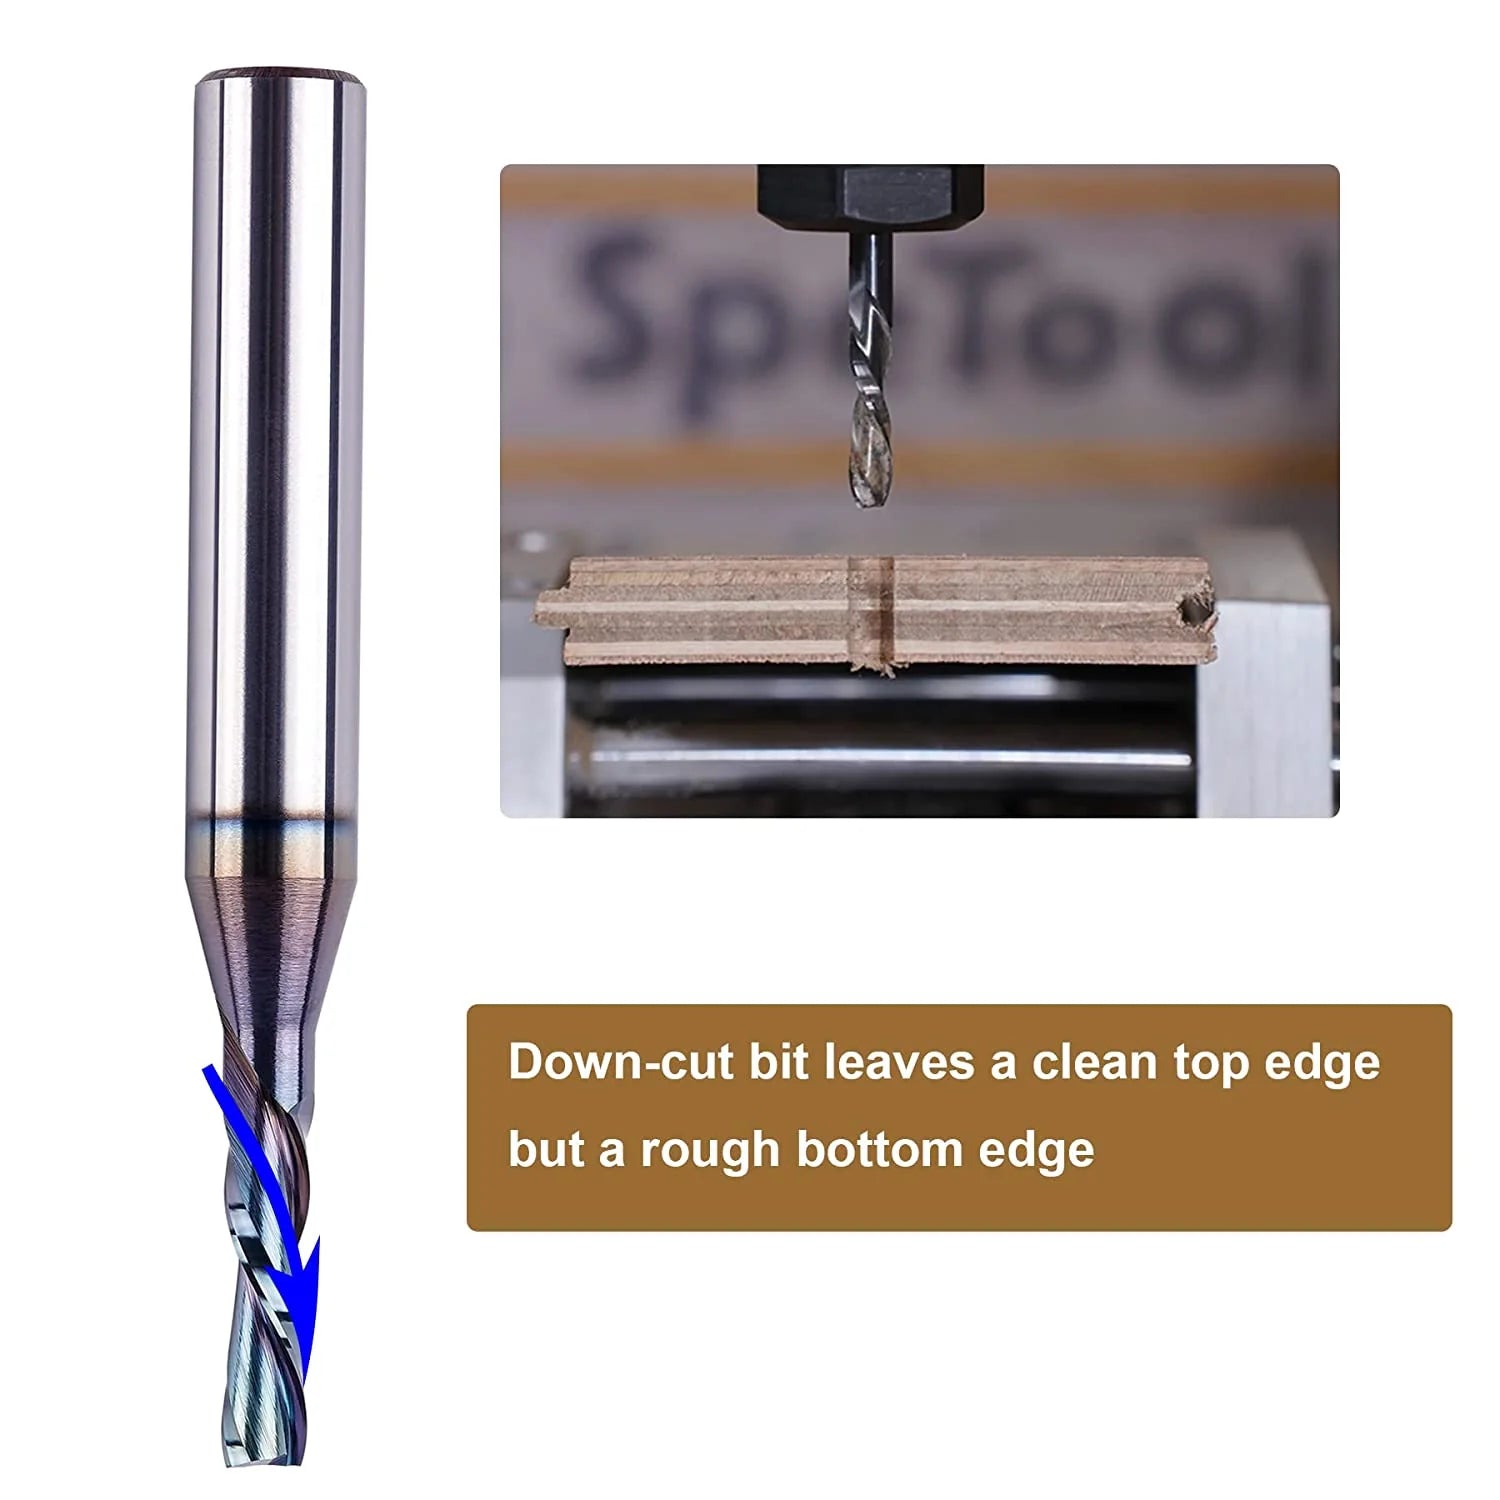 SpeTool 1 8 Dia 1 4 SHK Spiral Downcut Router Bits CNC End Mill for Wood SPE-X coated